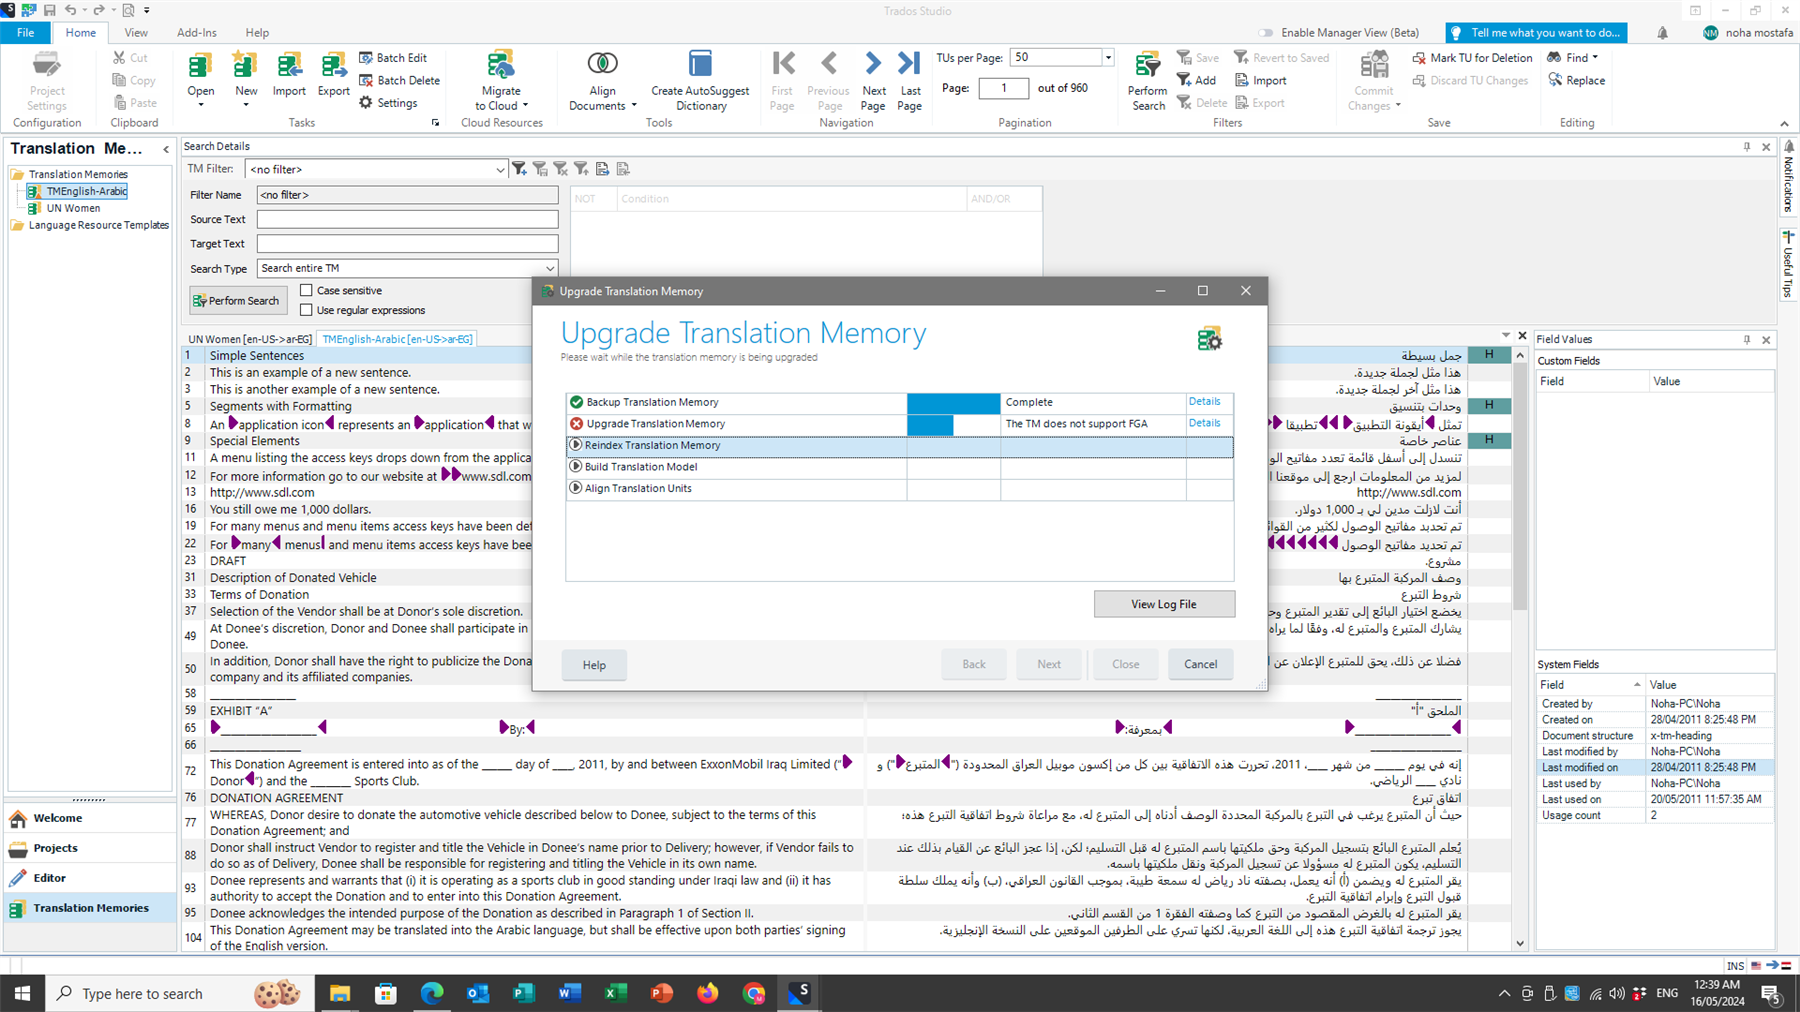 Screenshot of a translation memory upgrade process in Trados Studio with a message 'The TM does not support FGA' indicating an error.